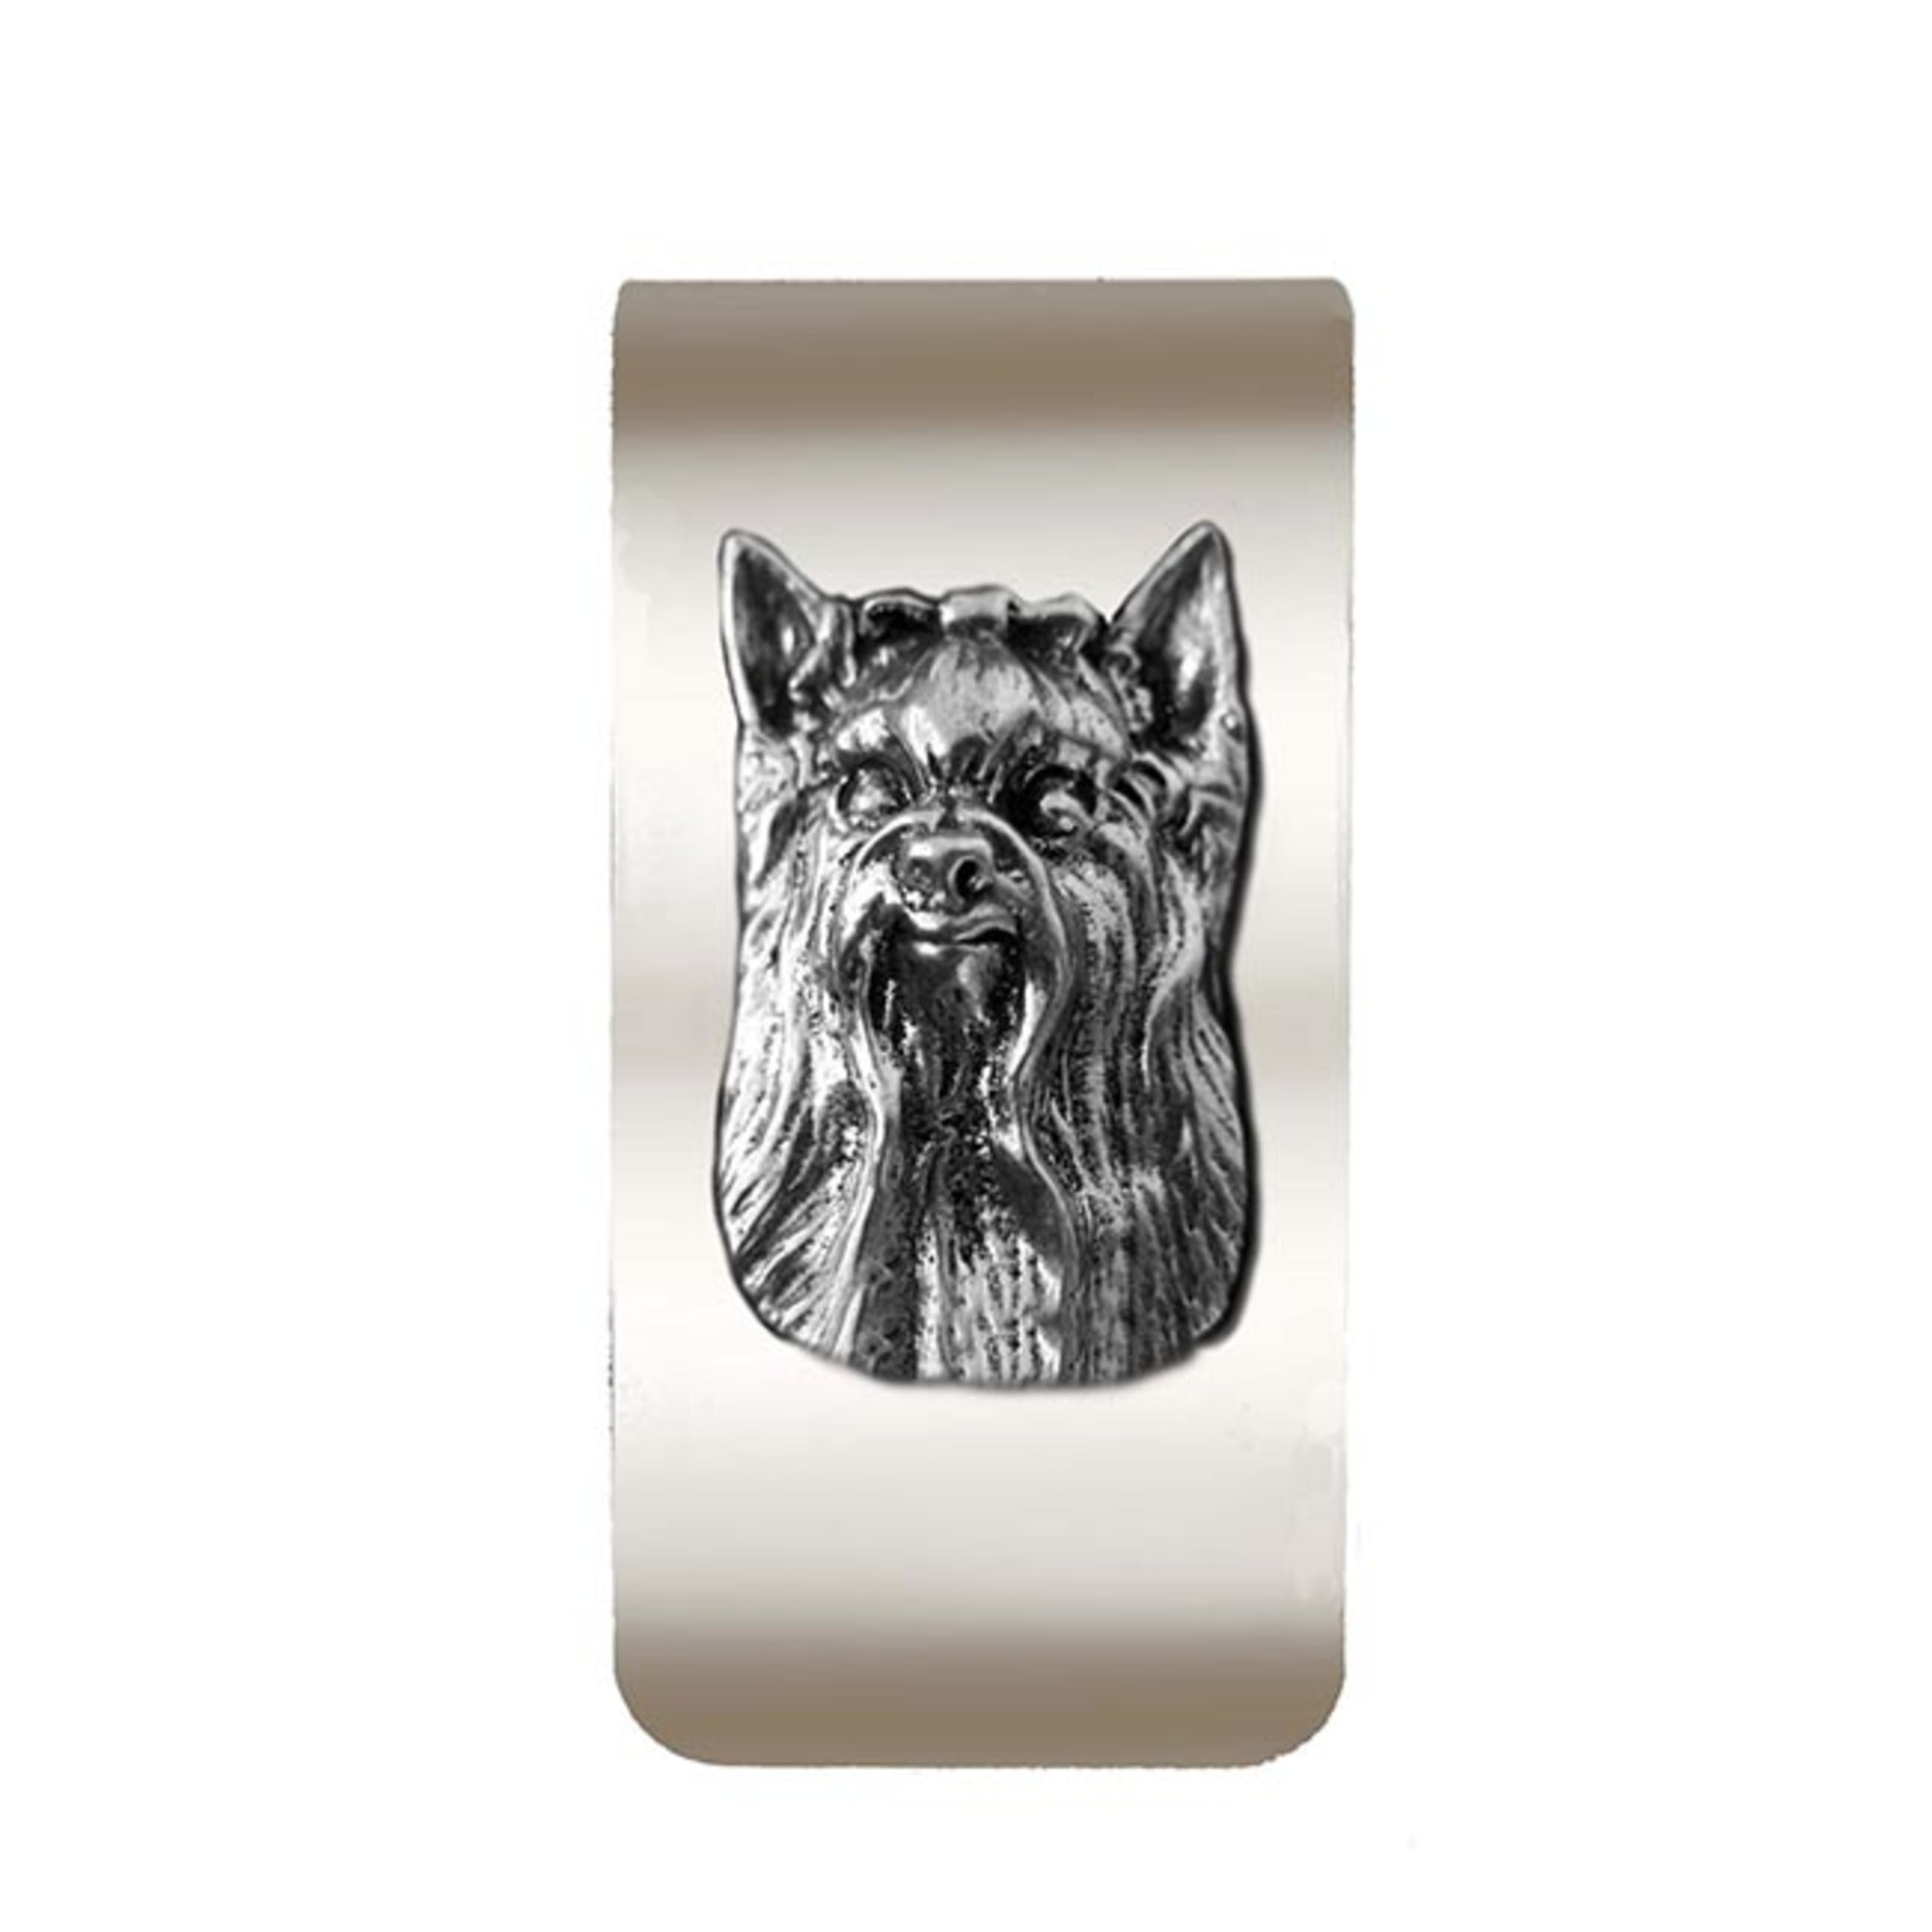 New-Spin Metal Casting Yorkie Money Clip